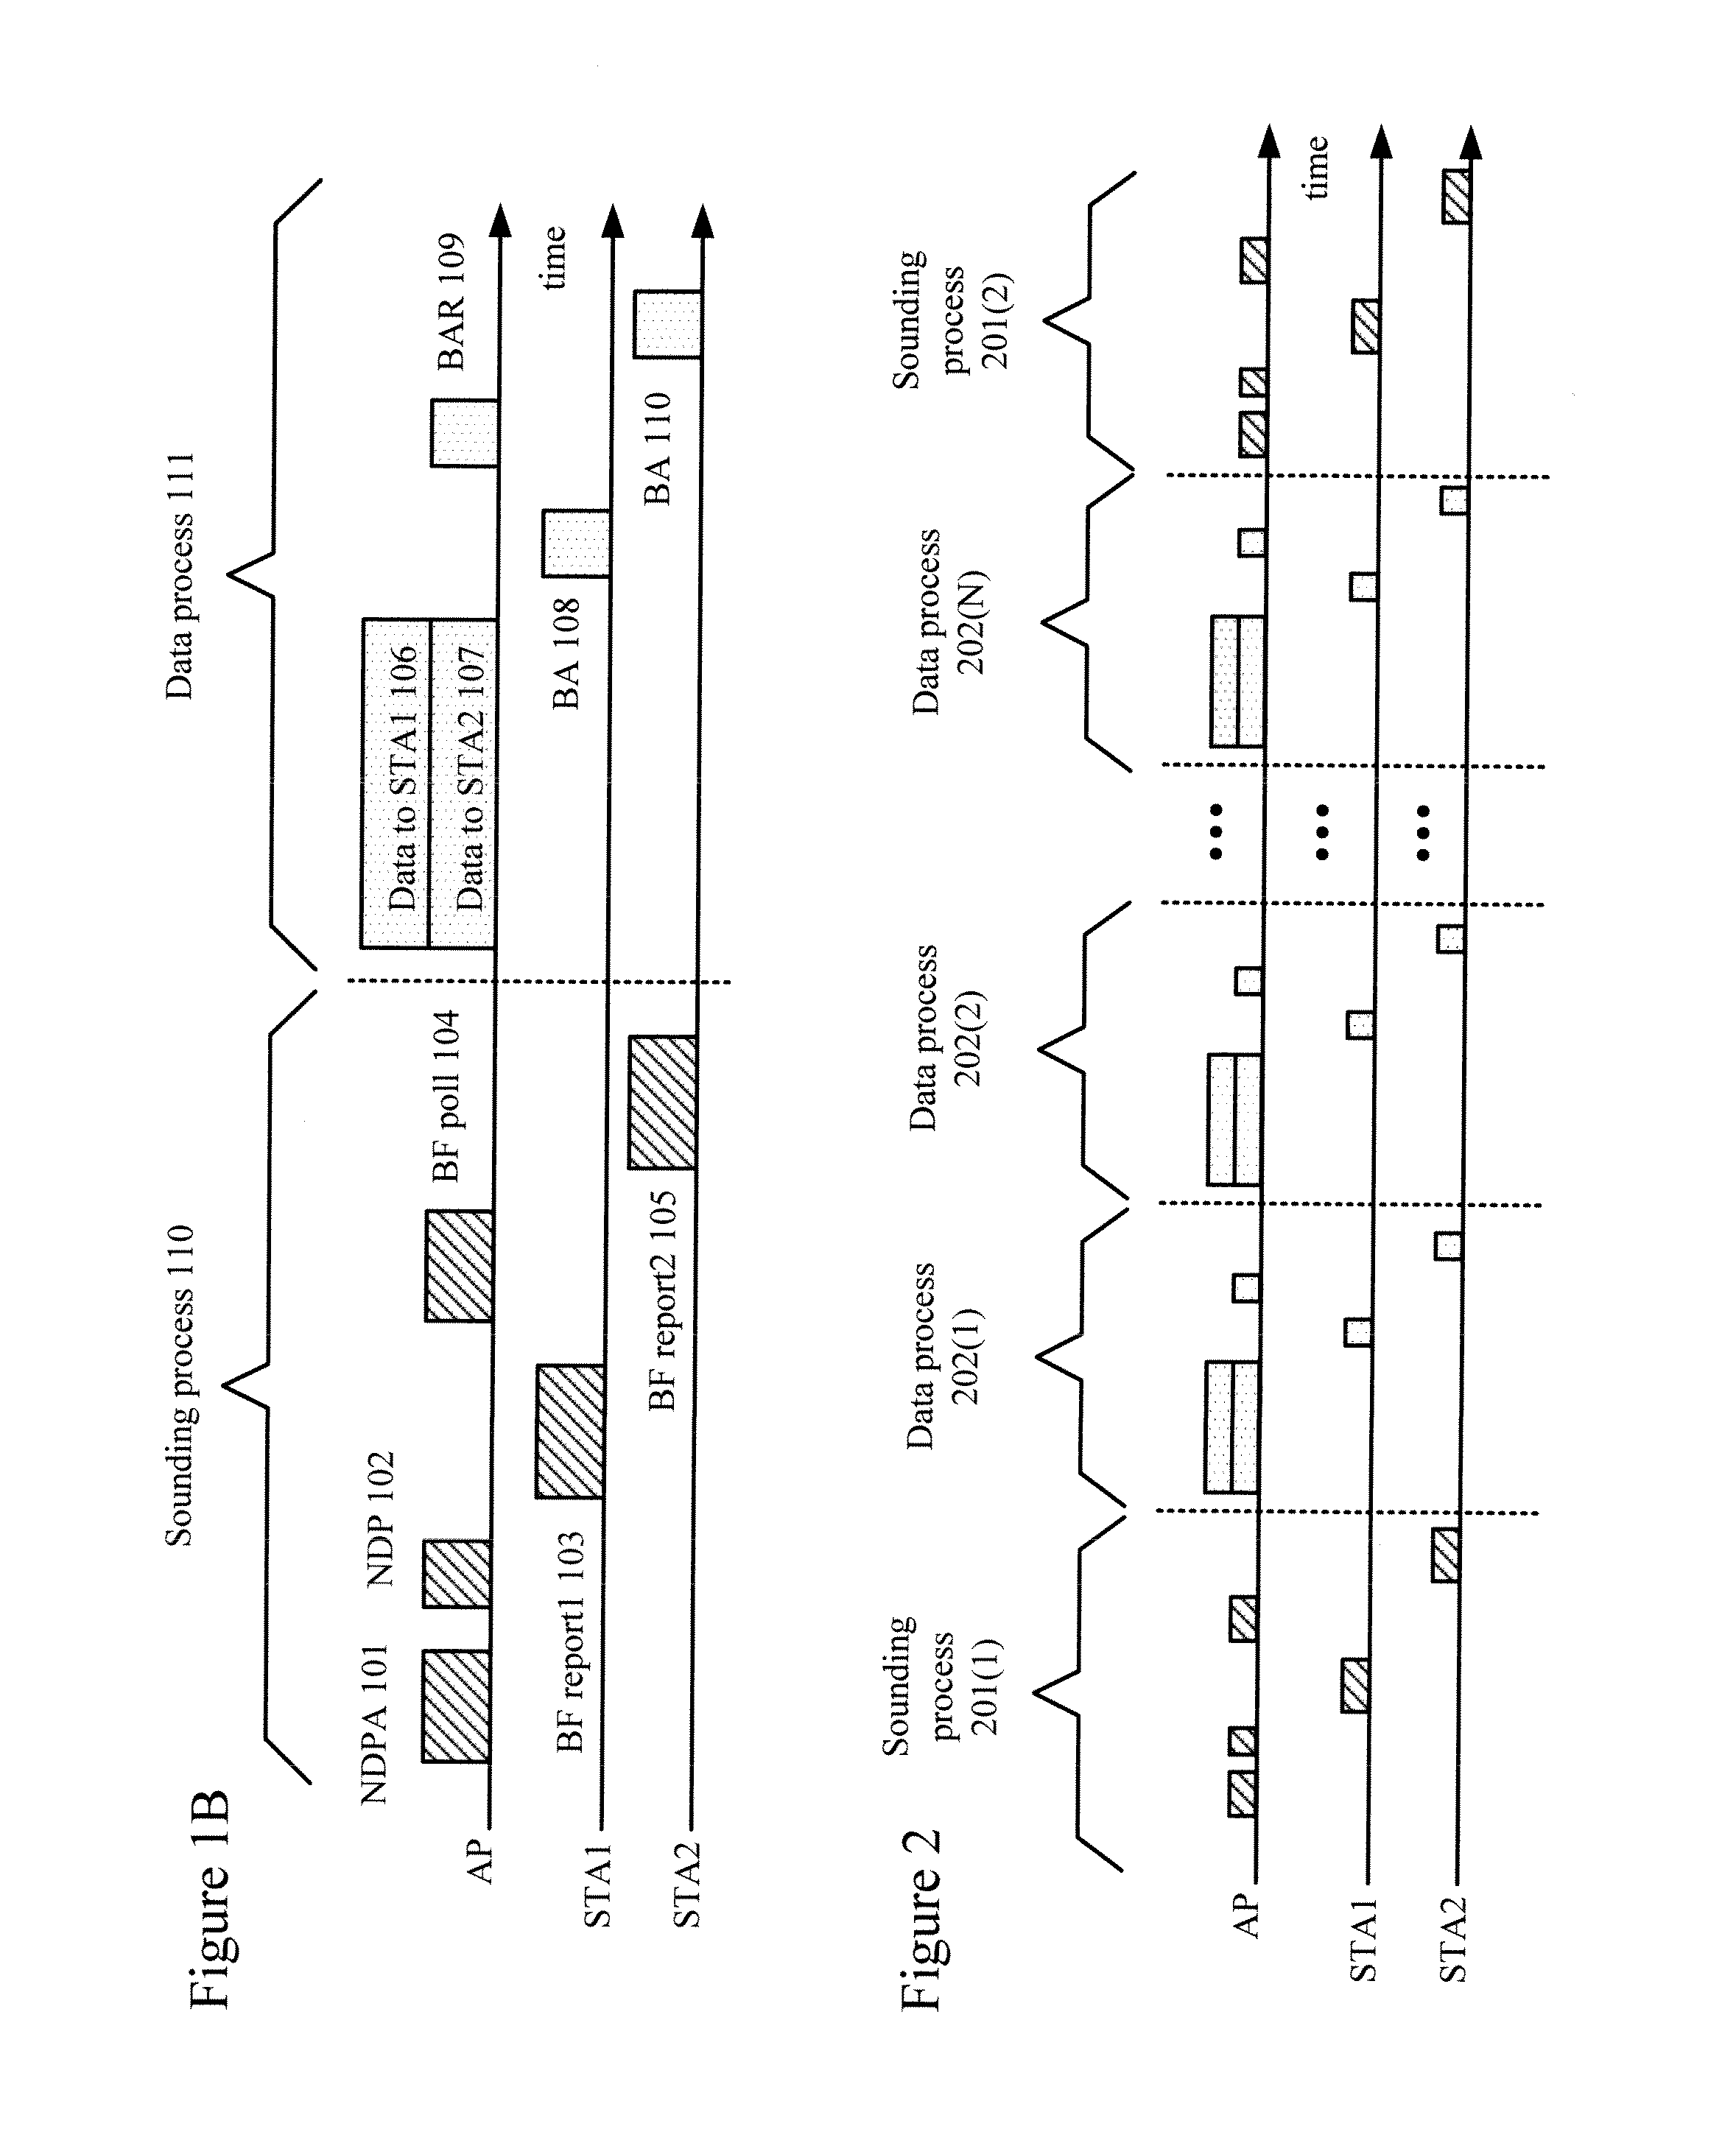 Method And System For Boosting Transmission Settings Based On Signal To Interference And Noise Ratio